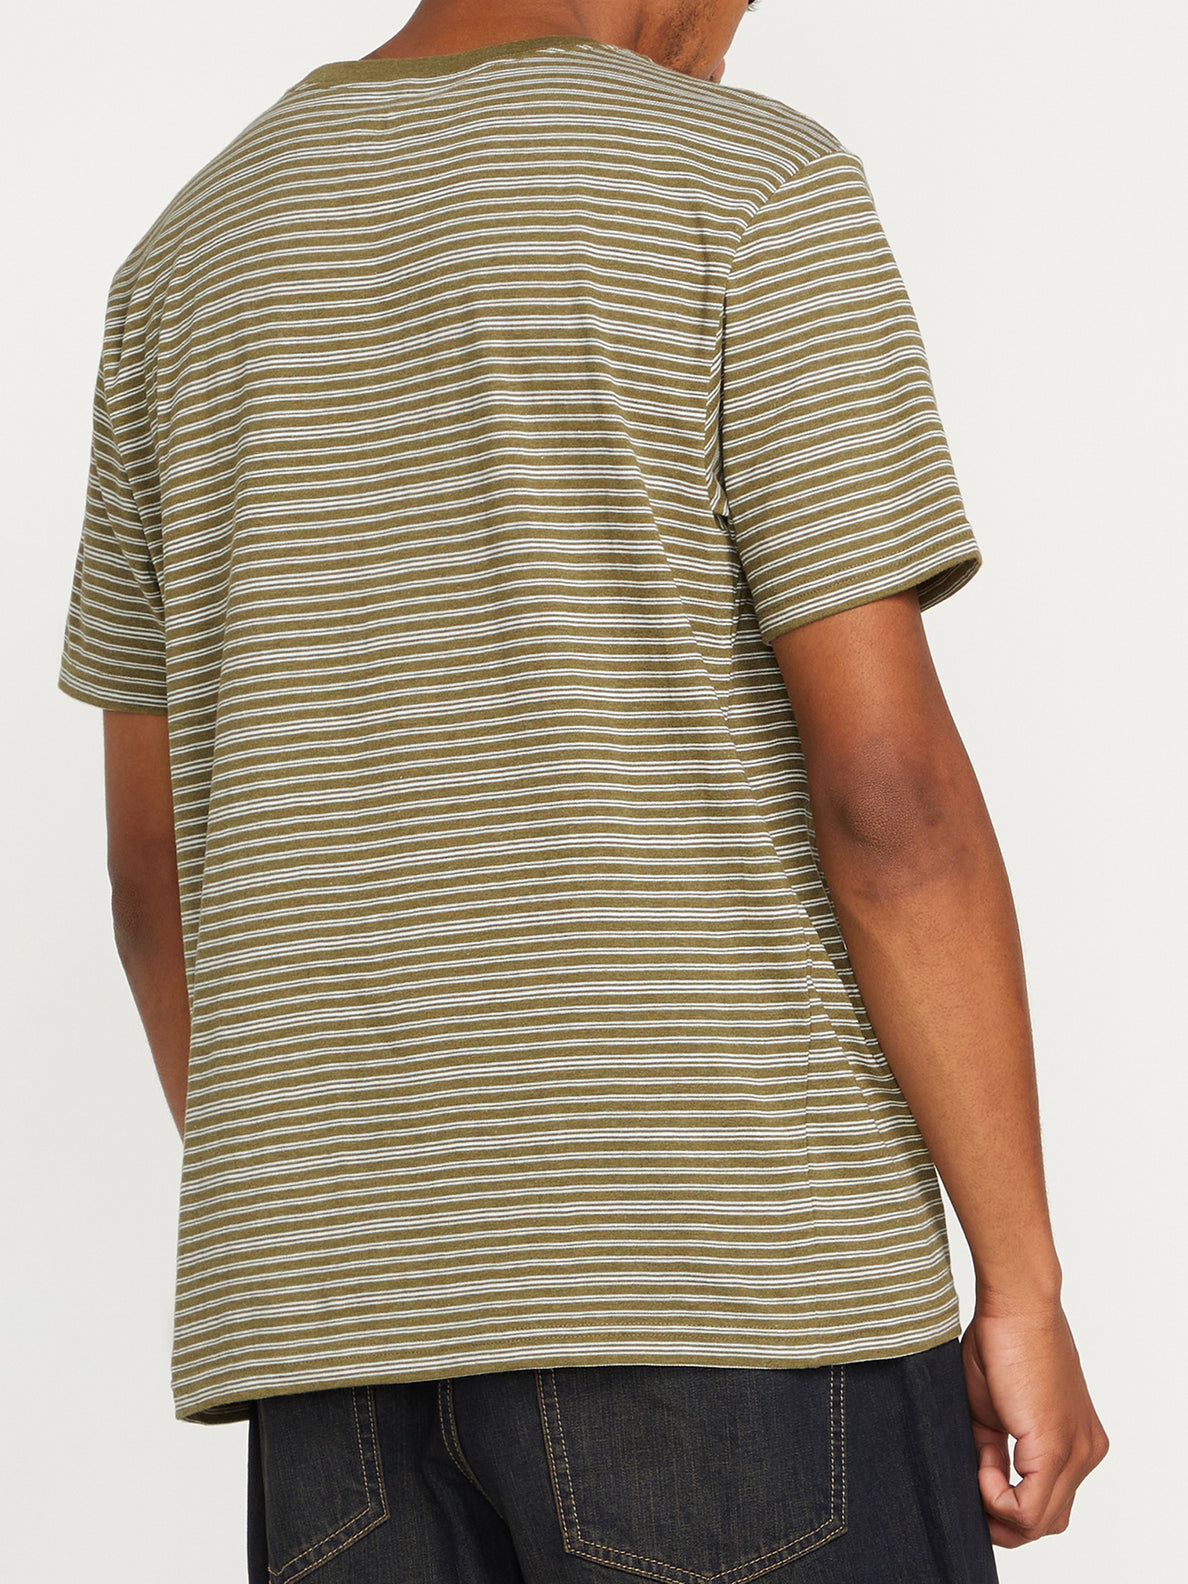 Static Stripe Crew Short Sleeve Shirt - Old Mill (A0112302_OLM) [18]